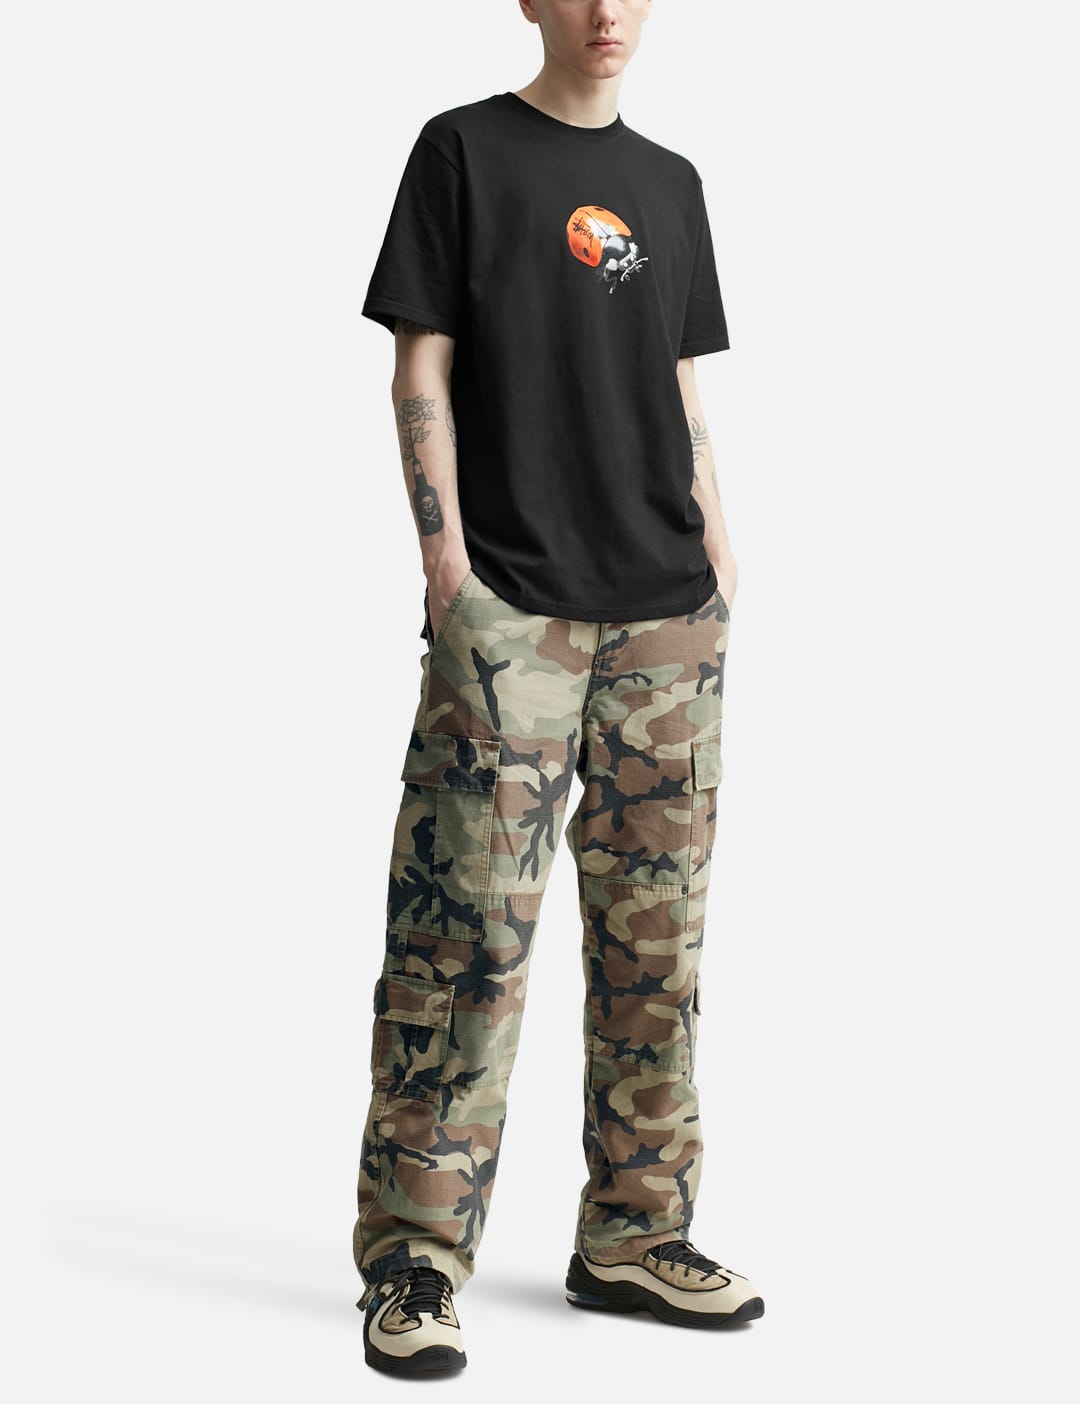 Stüssy   Ripstop Surplus Cargo Pants   HBX   Globally Curated